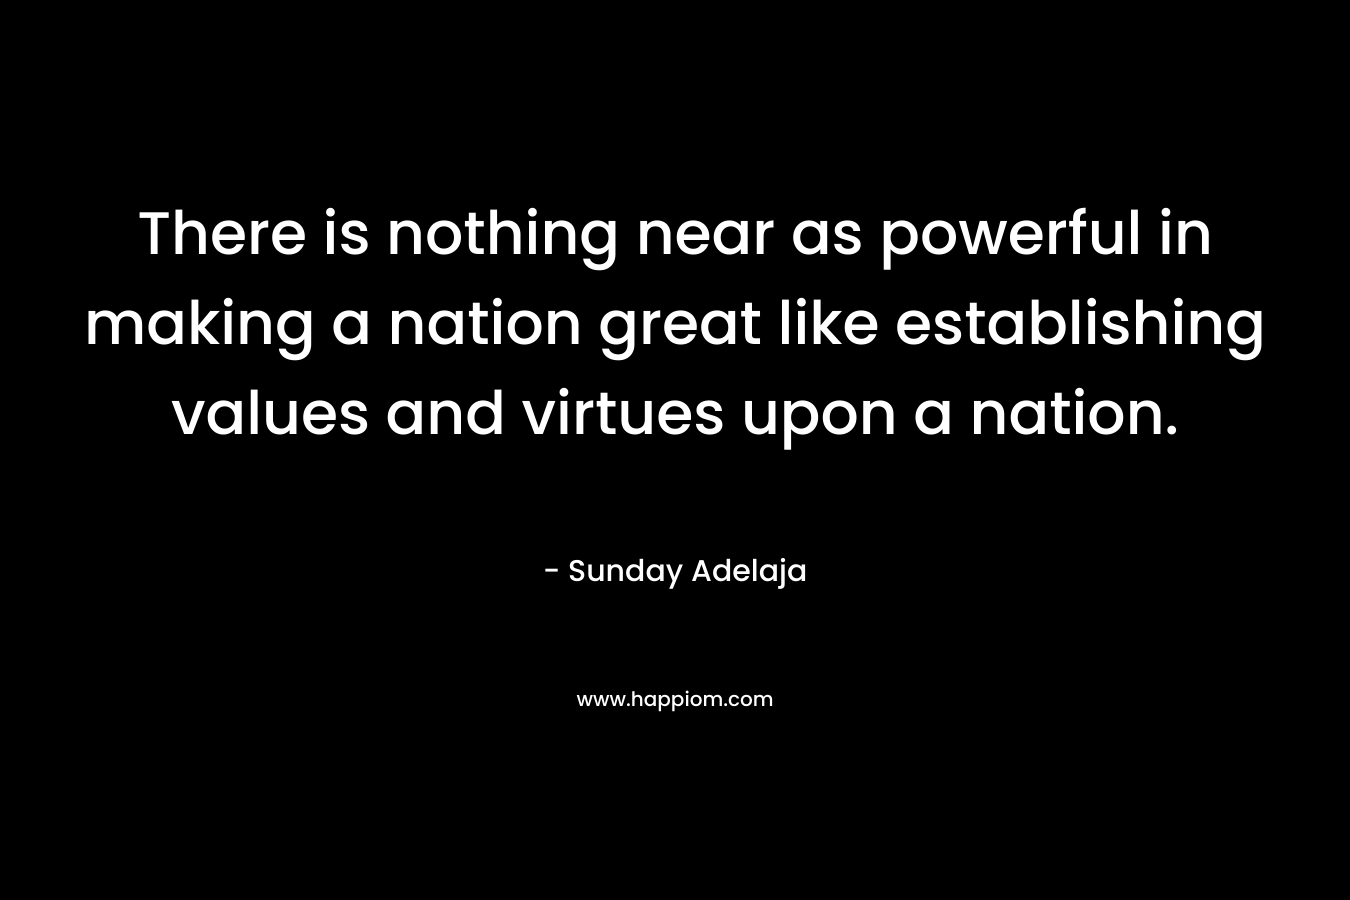 There is nothing near as powerful in making a nation great like establishing values and virtues upon a nation. – Sunday Adelaja